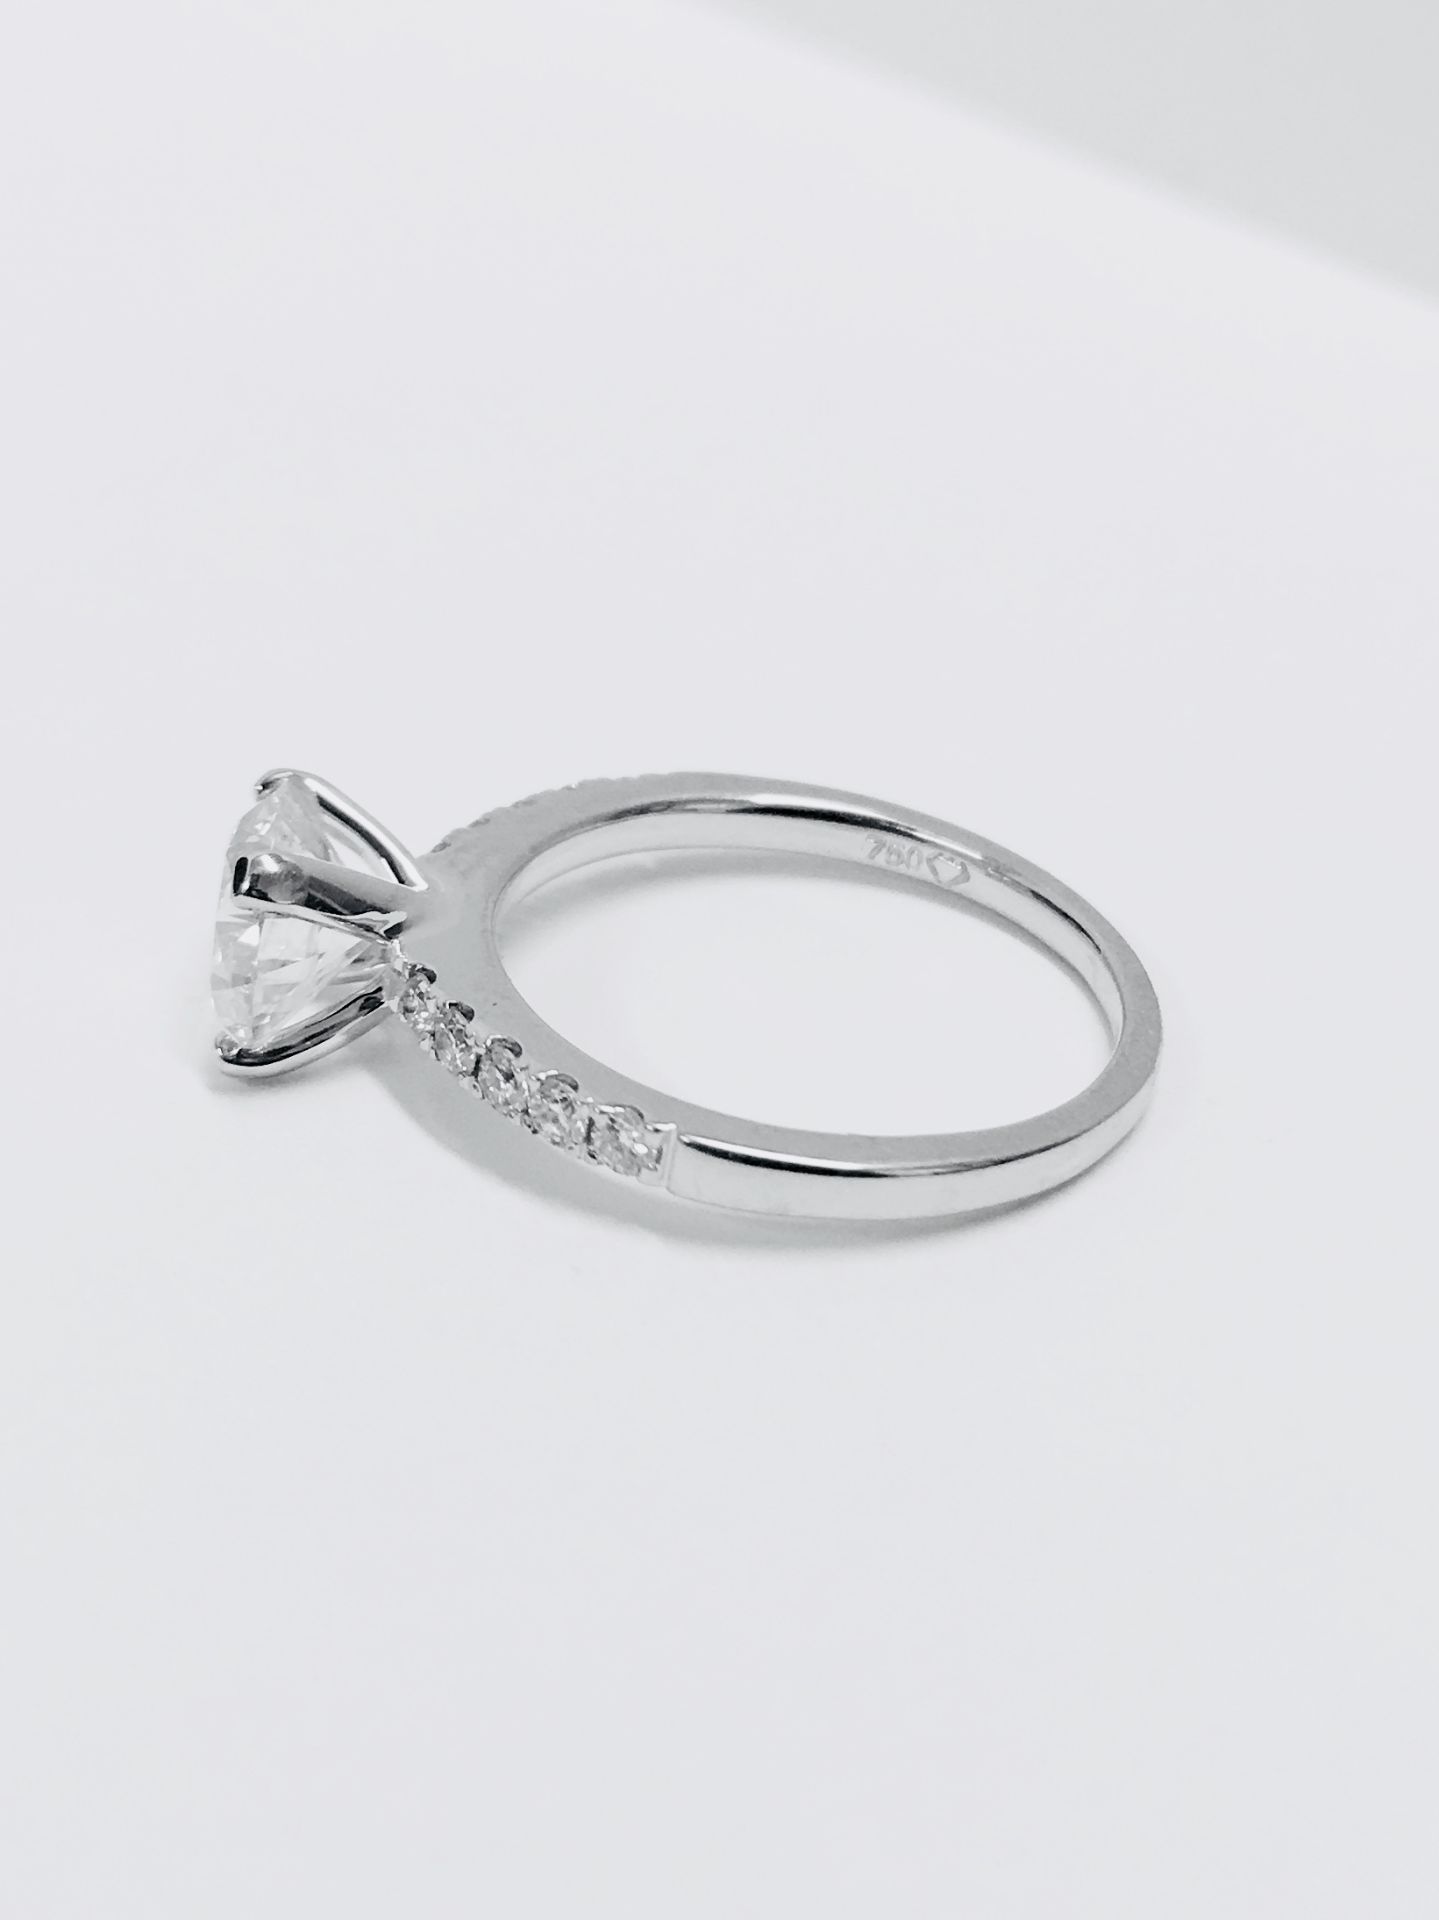 1ct Diamond solitaire ring,1ct h si2 clarity natural diamond ,18ct white gold diamond setting 2.9gms - Image 3 of 3